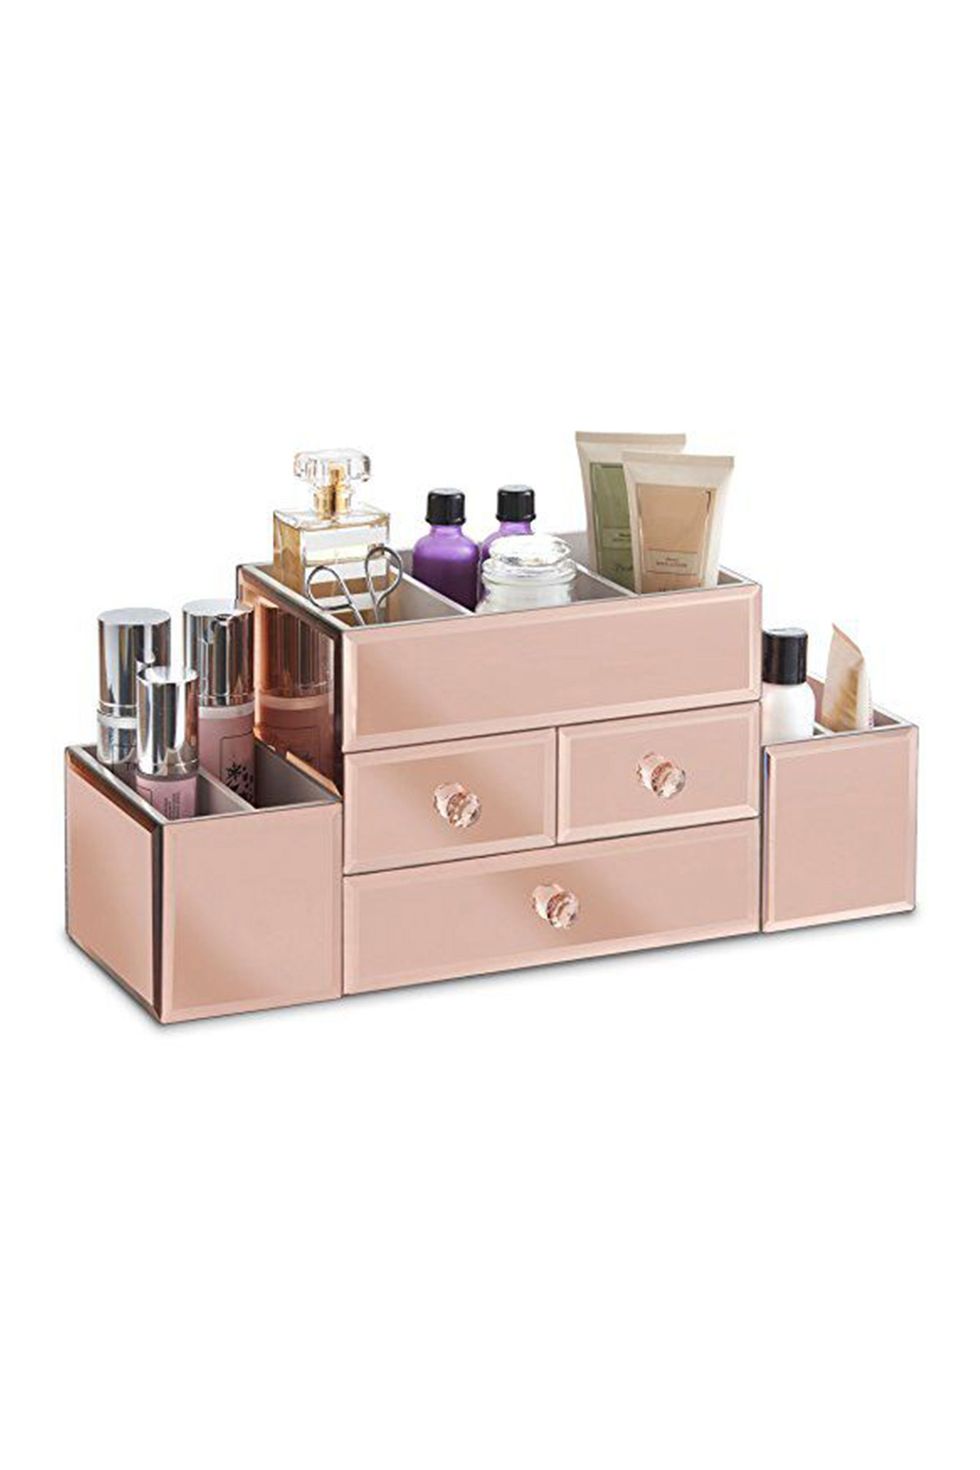 Beautify Large Mirrored Rose Gold Glass Jewelry Box & Cosmetic Makeup Organizer with 3 Drawers and 9 Sections